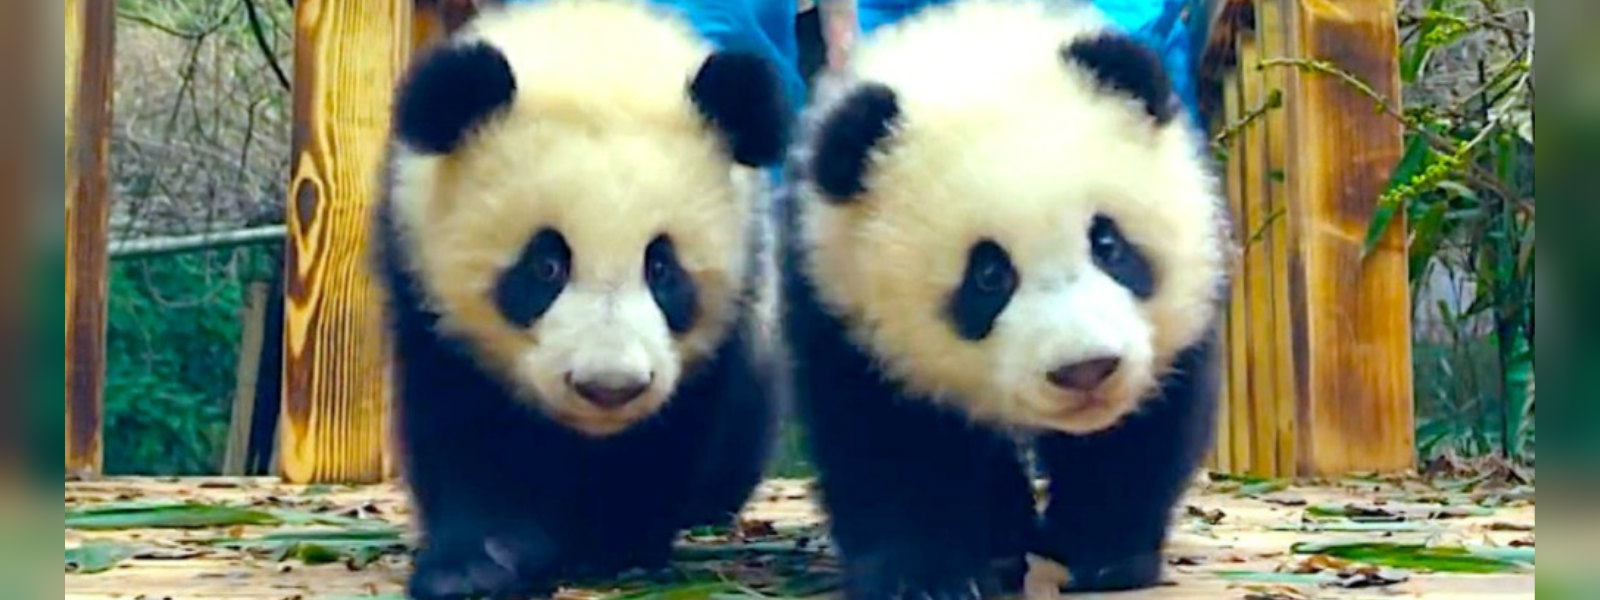 A new record by a pair of Pandas in Mexico